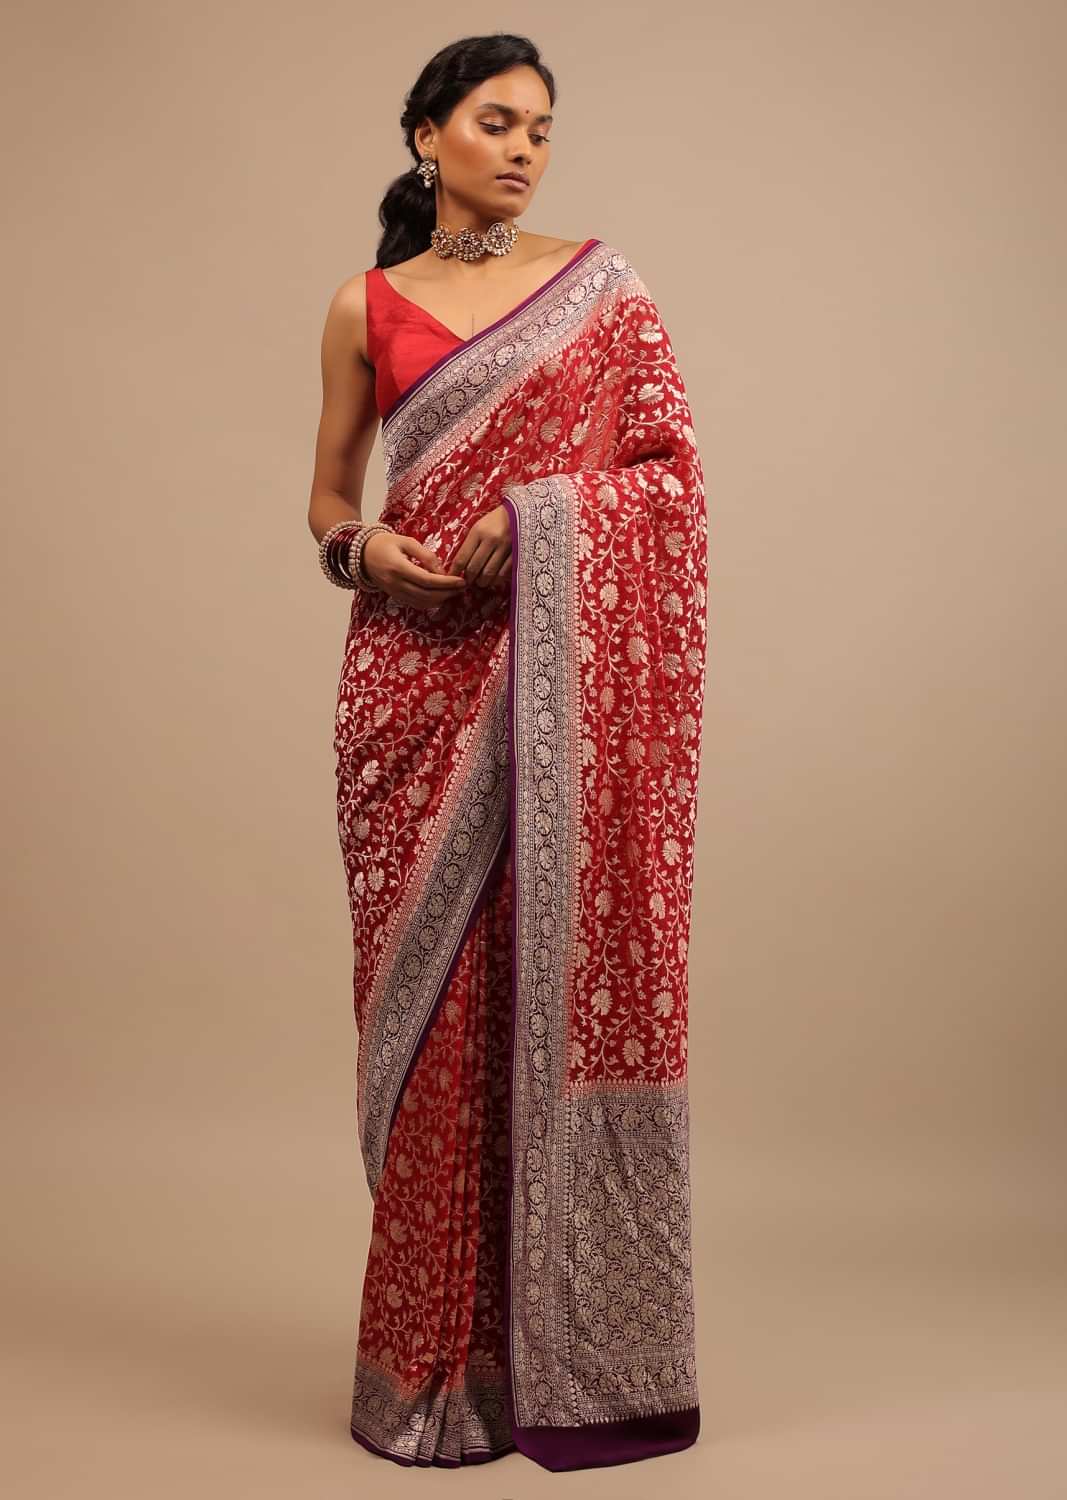 Red Saree In Georgette With Contrasting Wine Border And Woven Floral Jaal Work